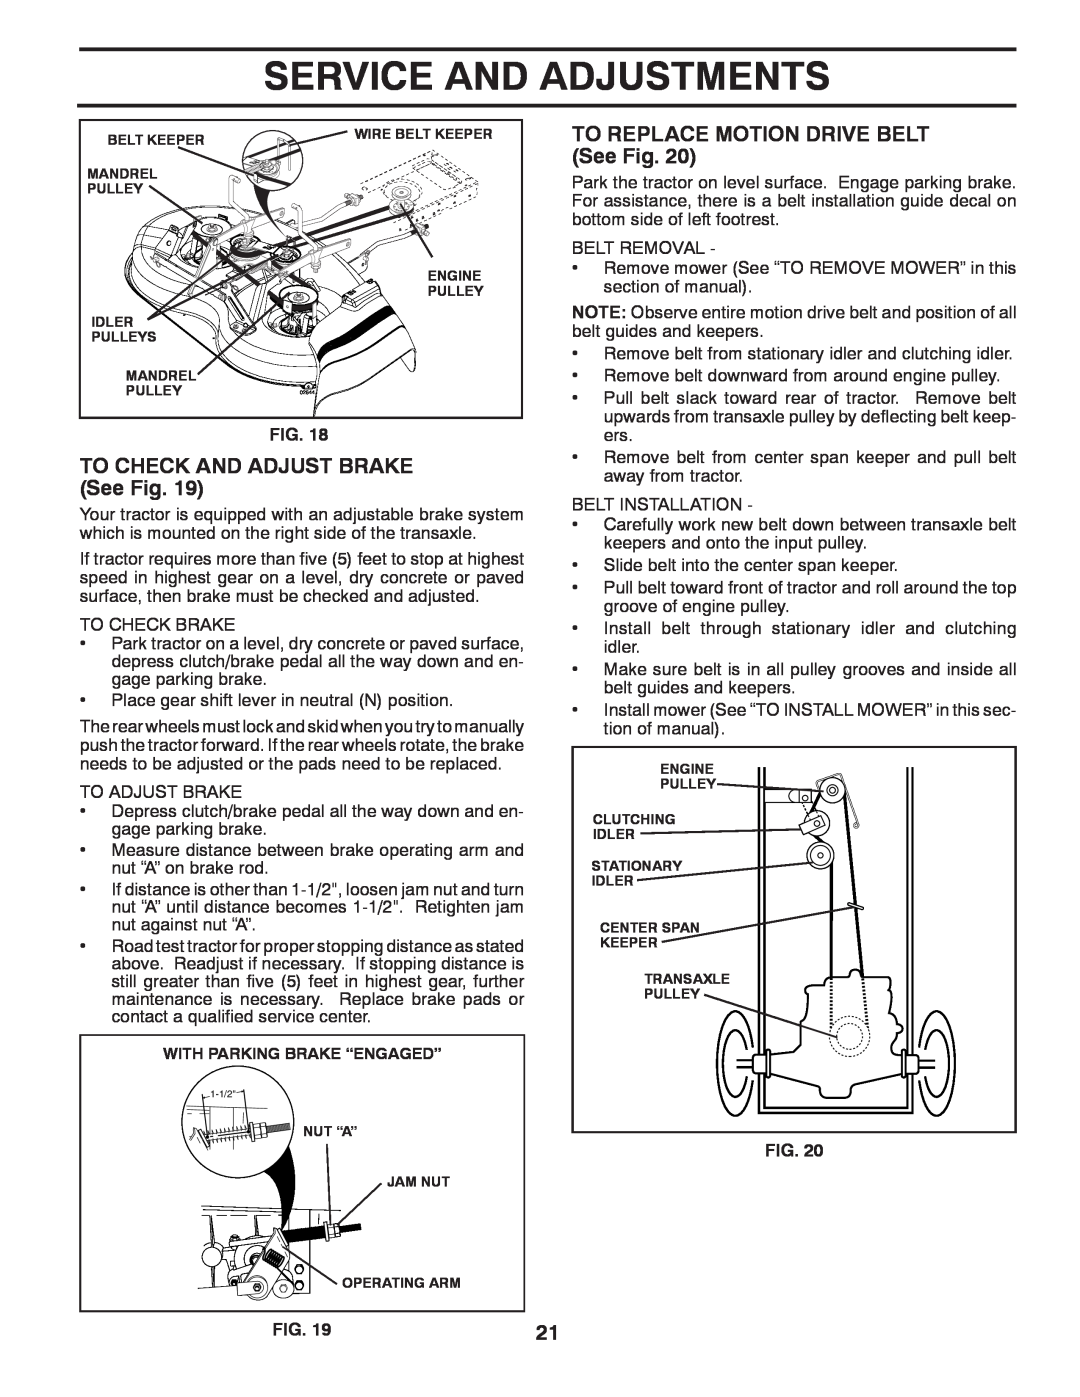 Poulan 960120068 manual TO CHECK AND ADJUST BRAKE See Fig, TO REPLACE MOTION DRIVE BELT See Fig, Service And Adjustments 